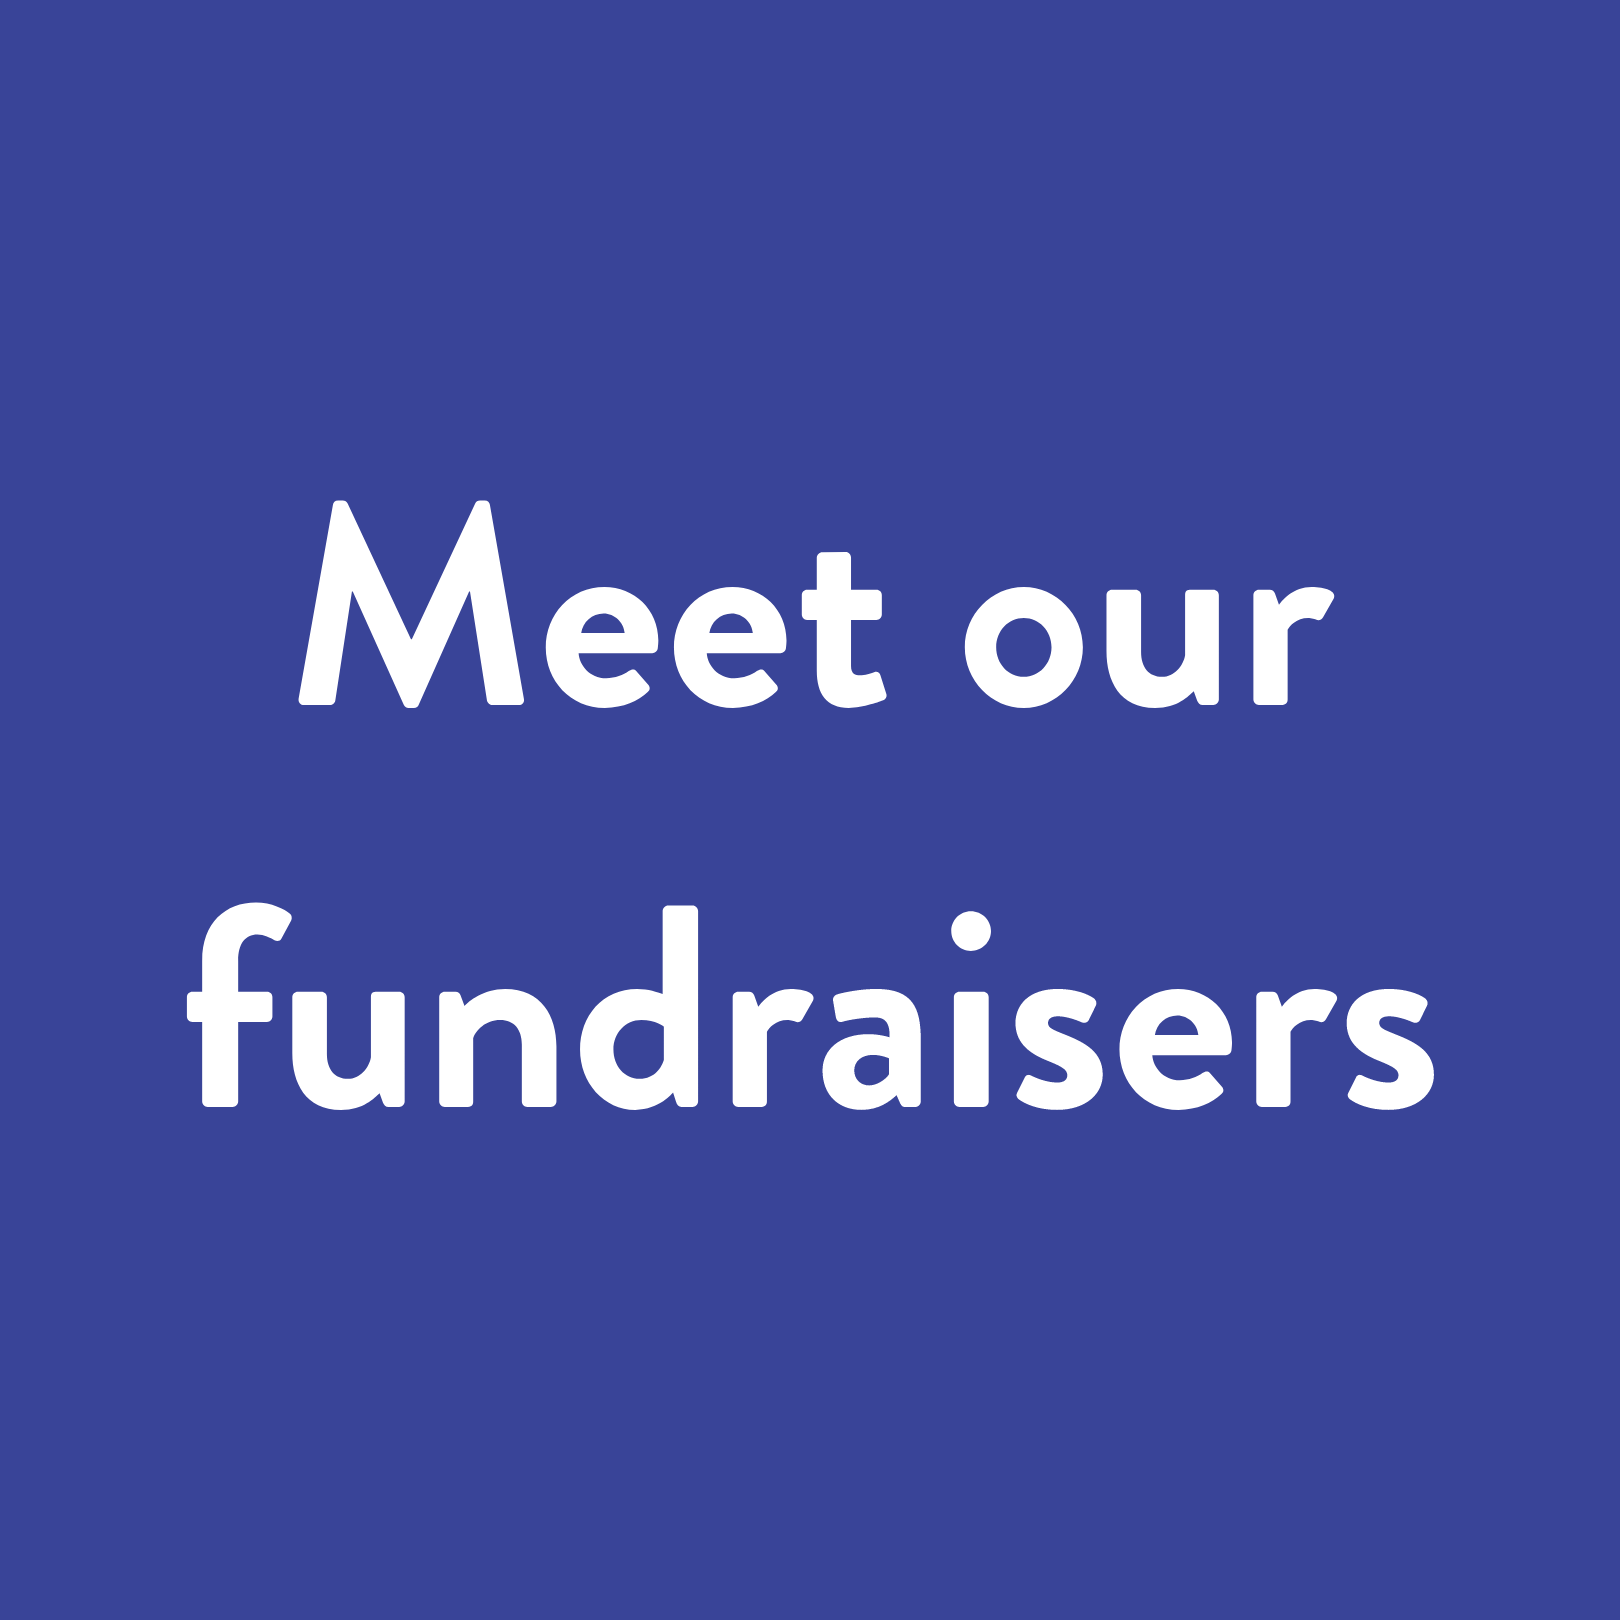 Meet our fundraisers - 15th anniversary